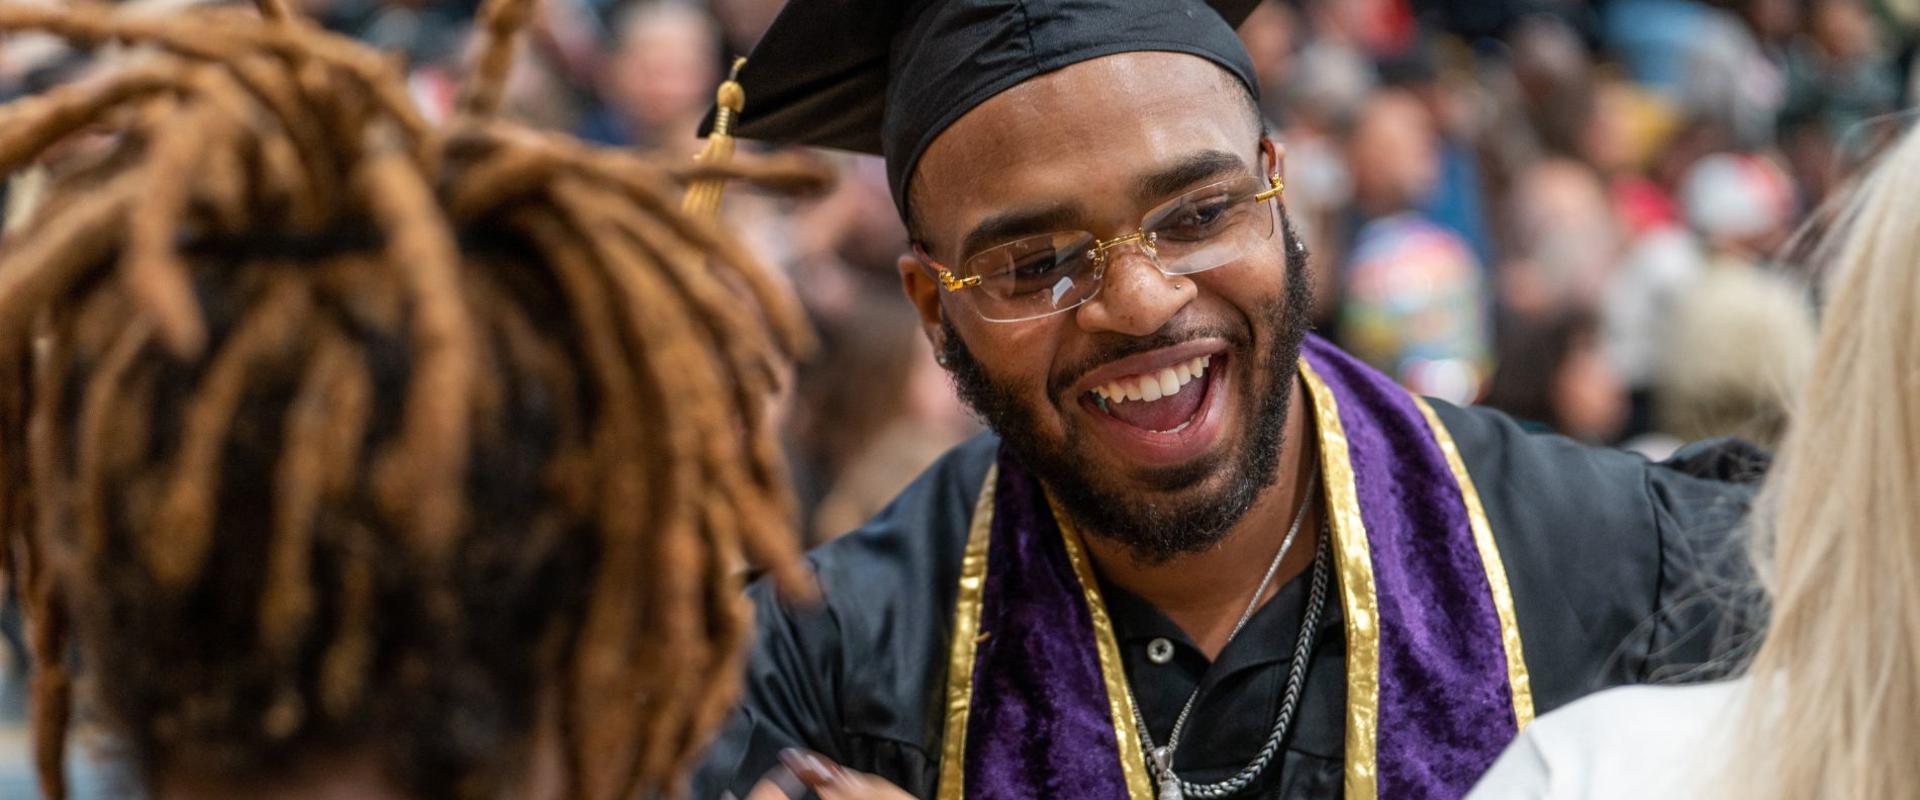 UNCP student smiles and leans in for a hug during commencement.